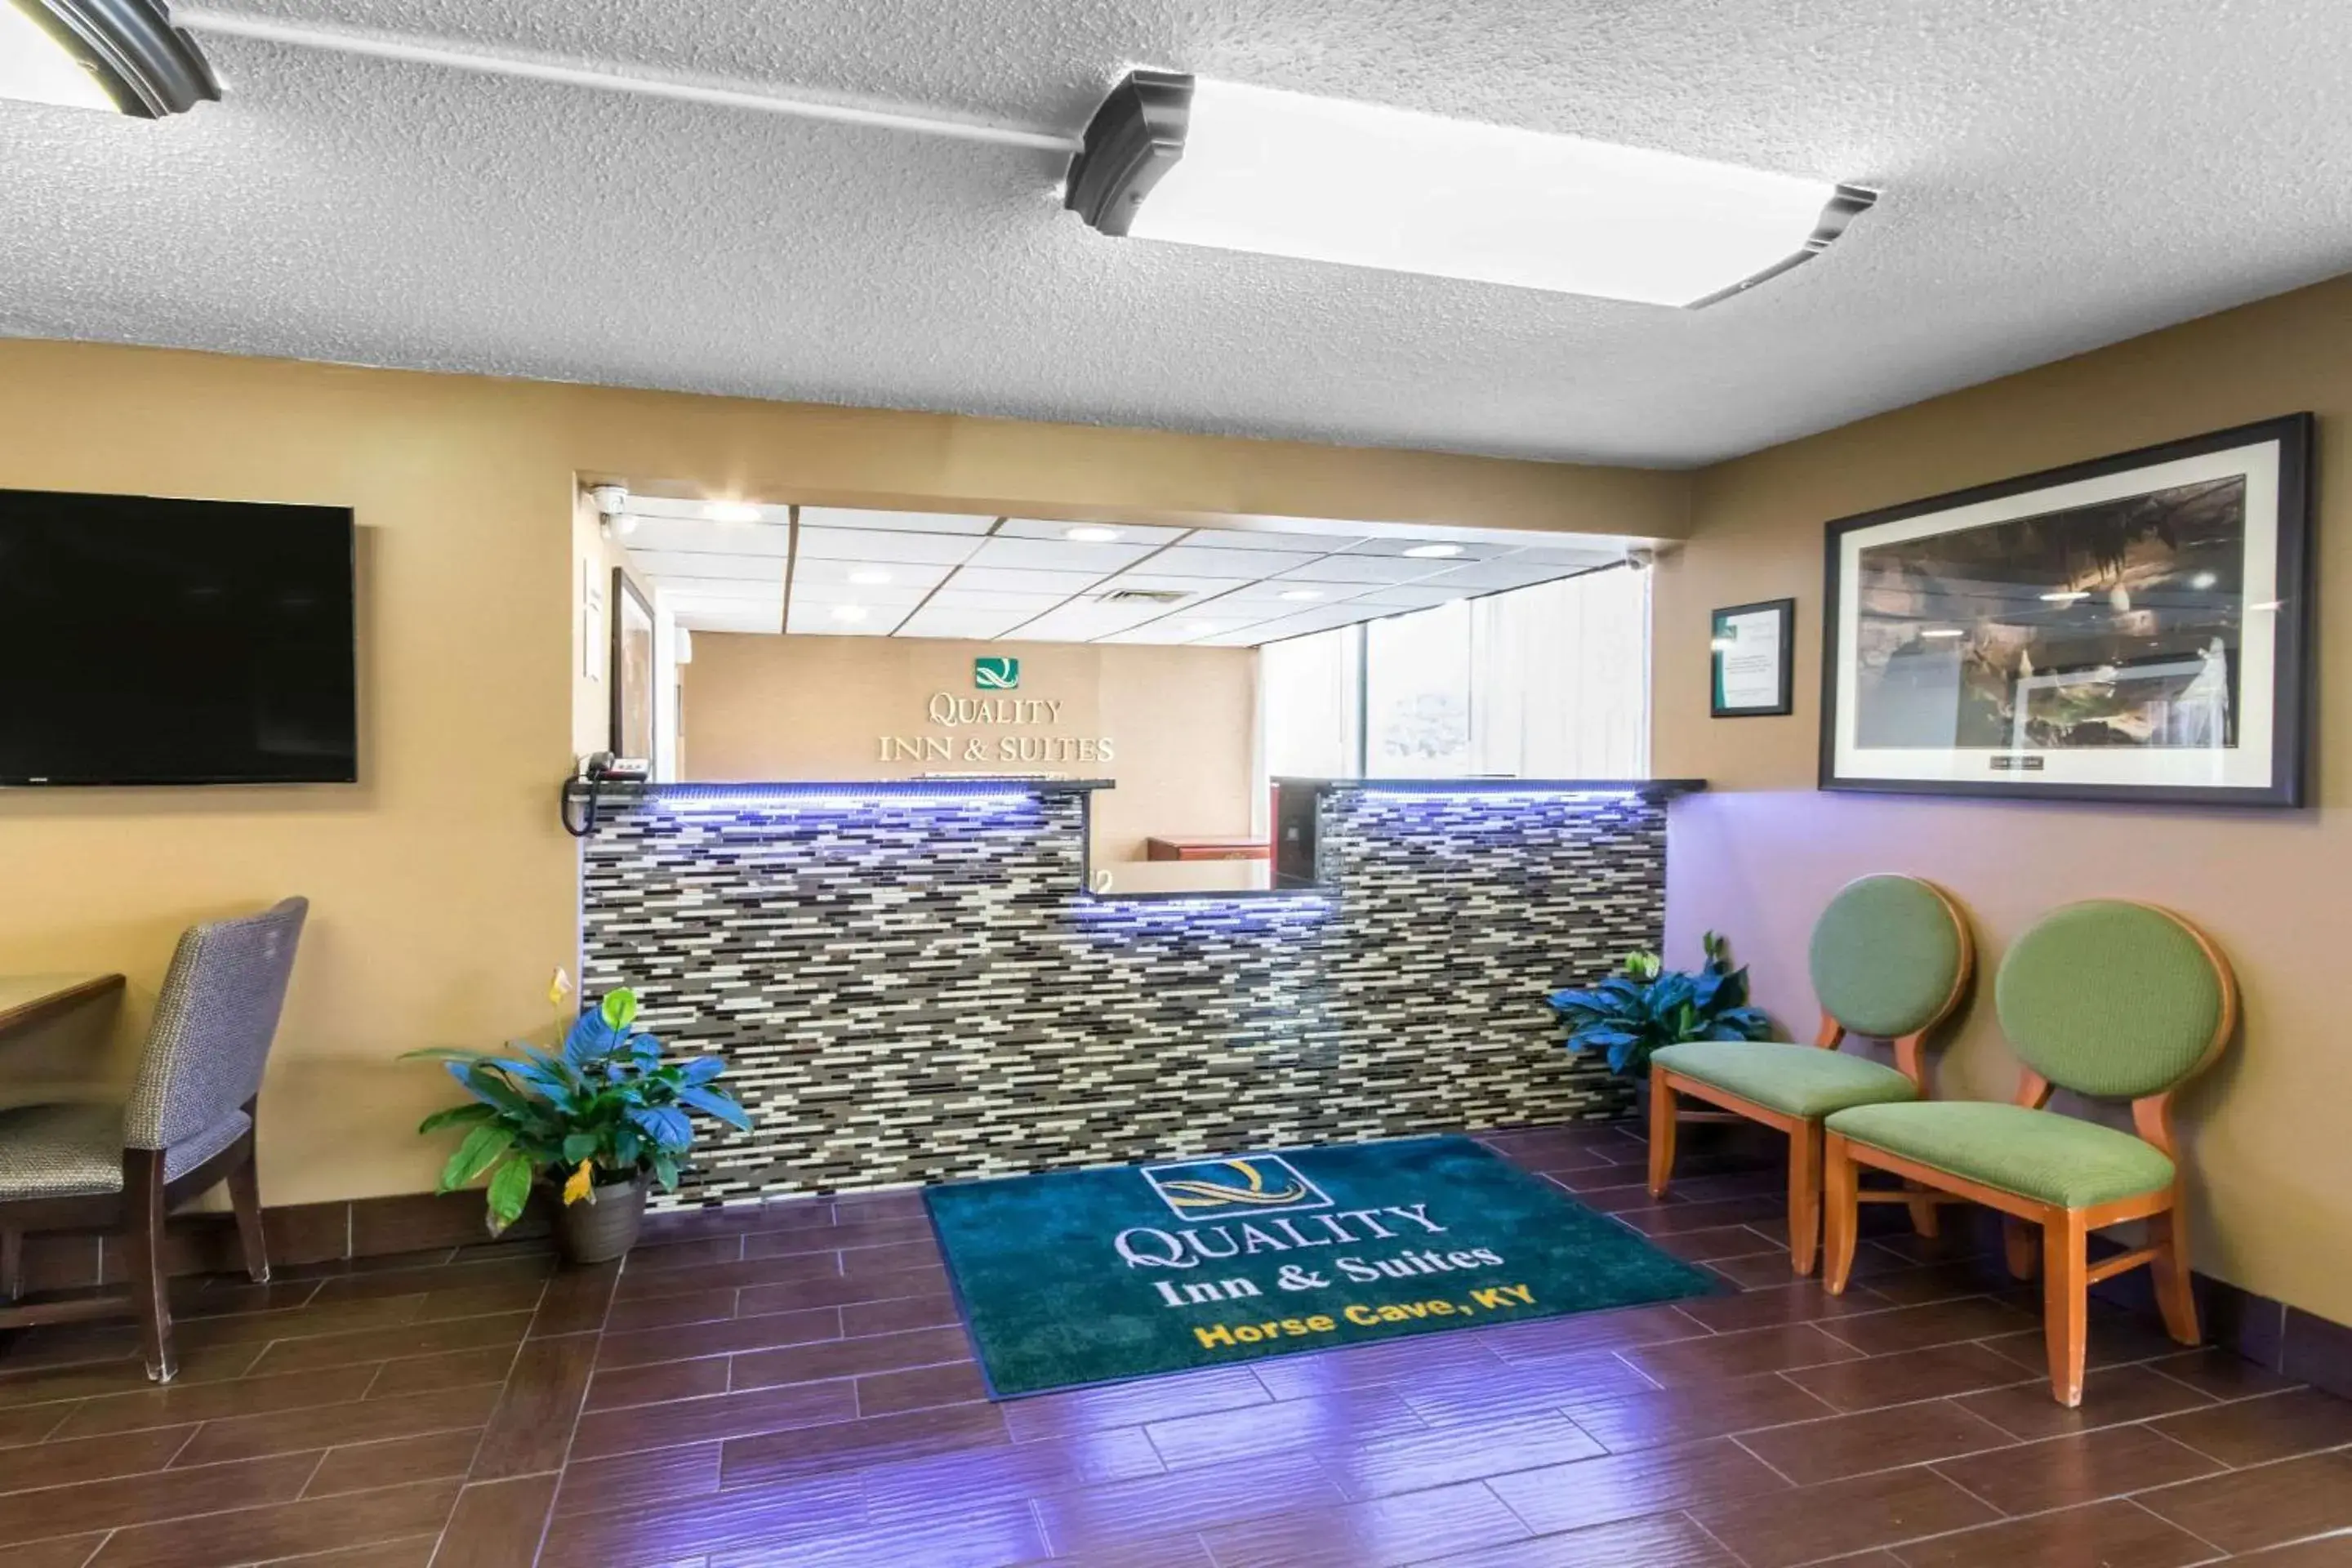 Lobby or reception in Quality Inn & Suites - Horse Cave